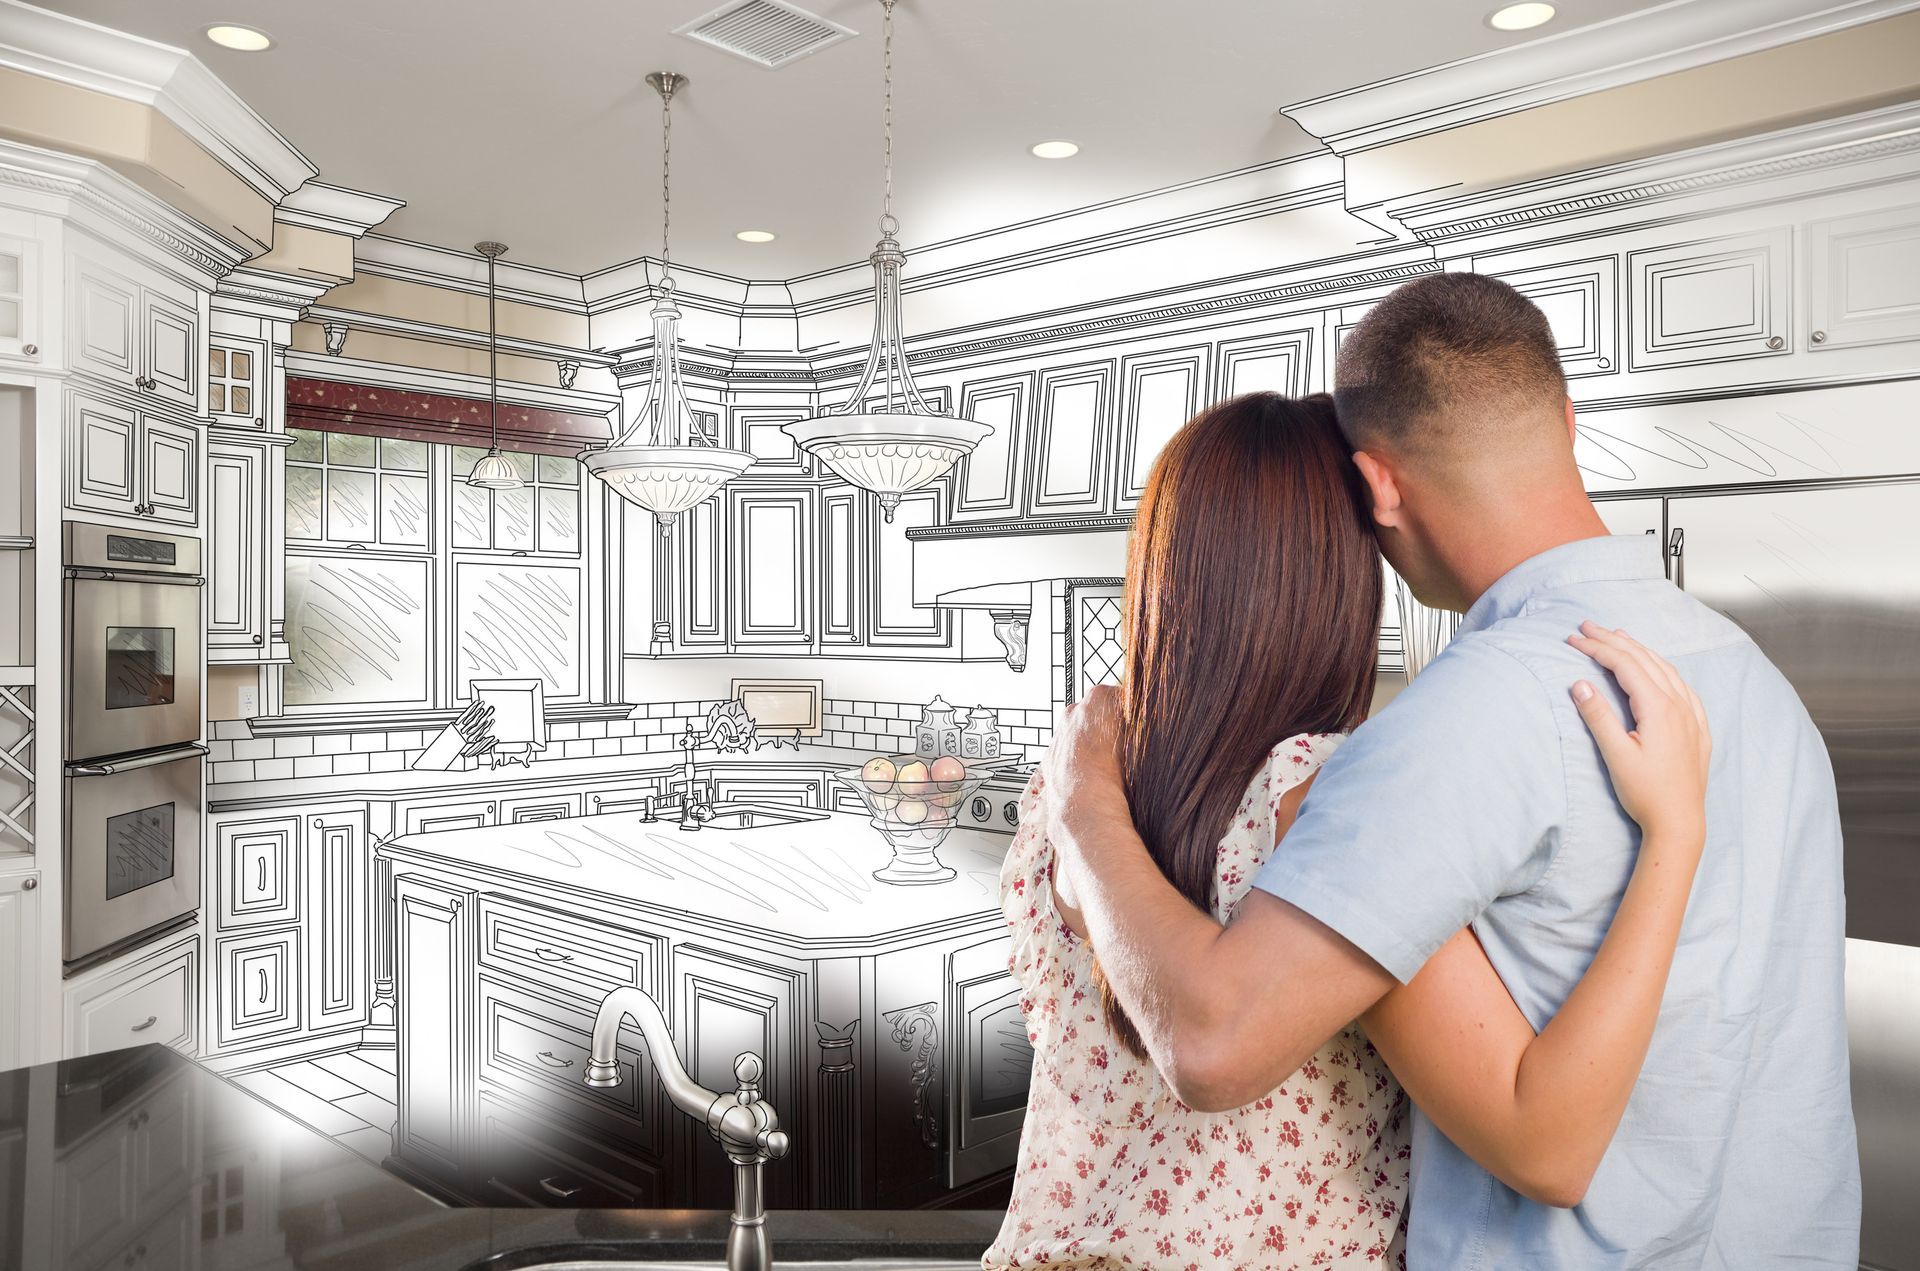 About Us Page pic of couple dream kitchen